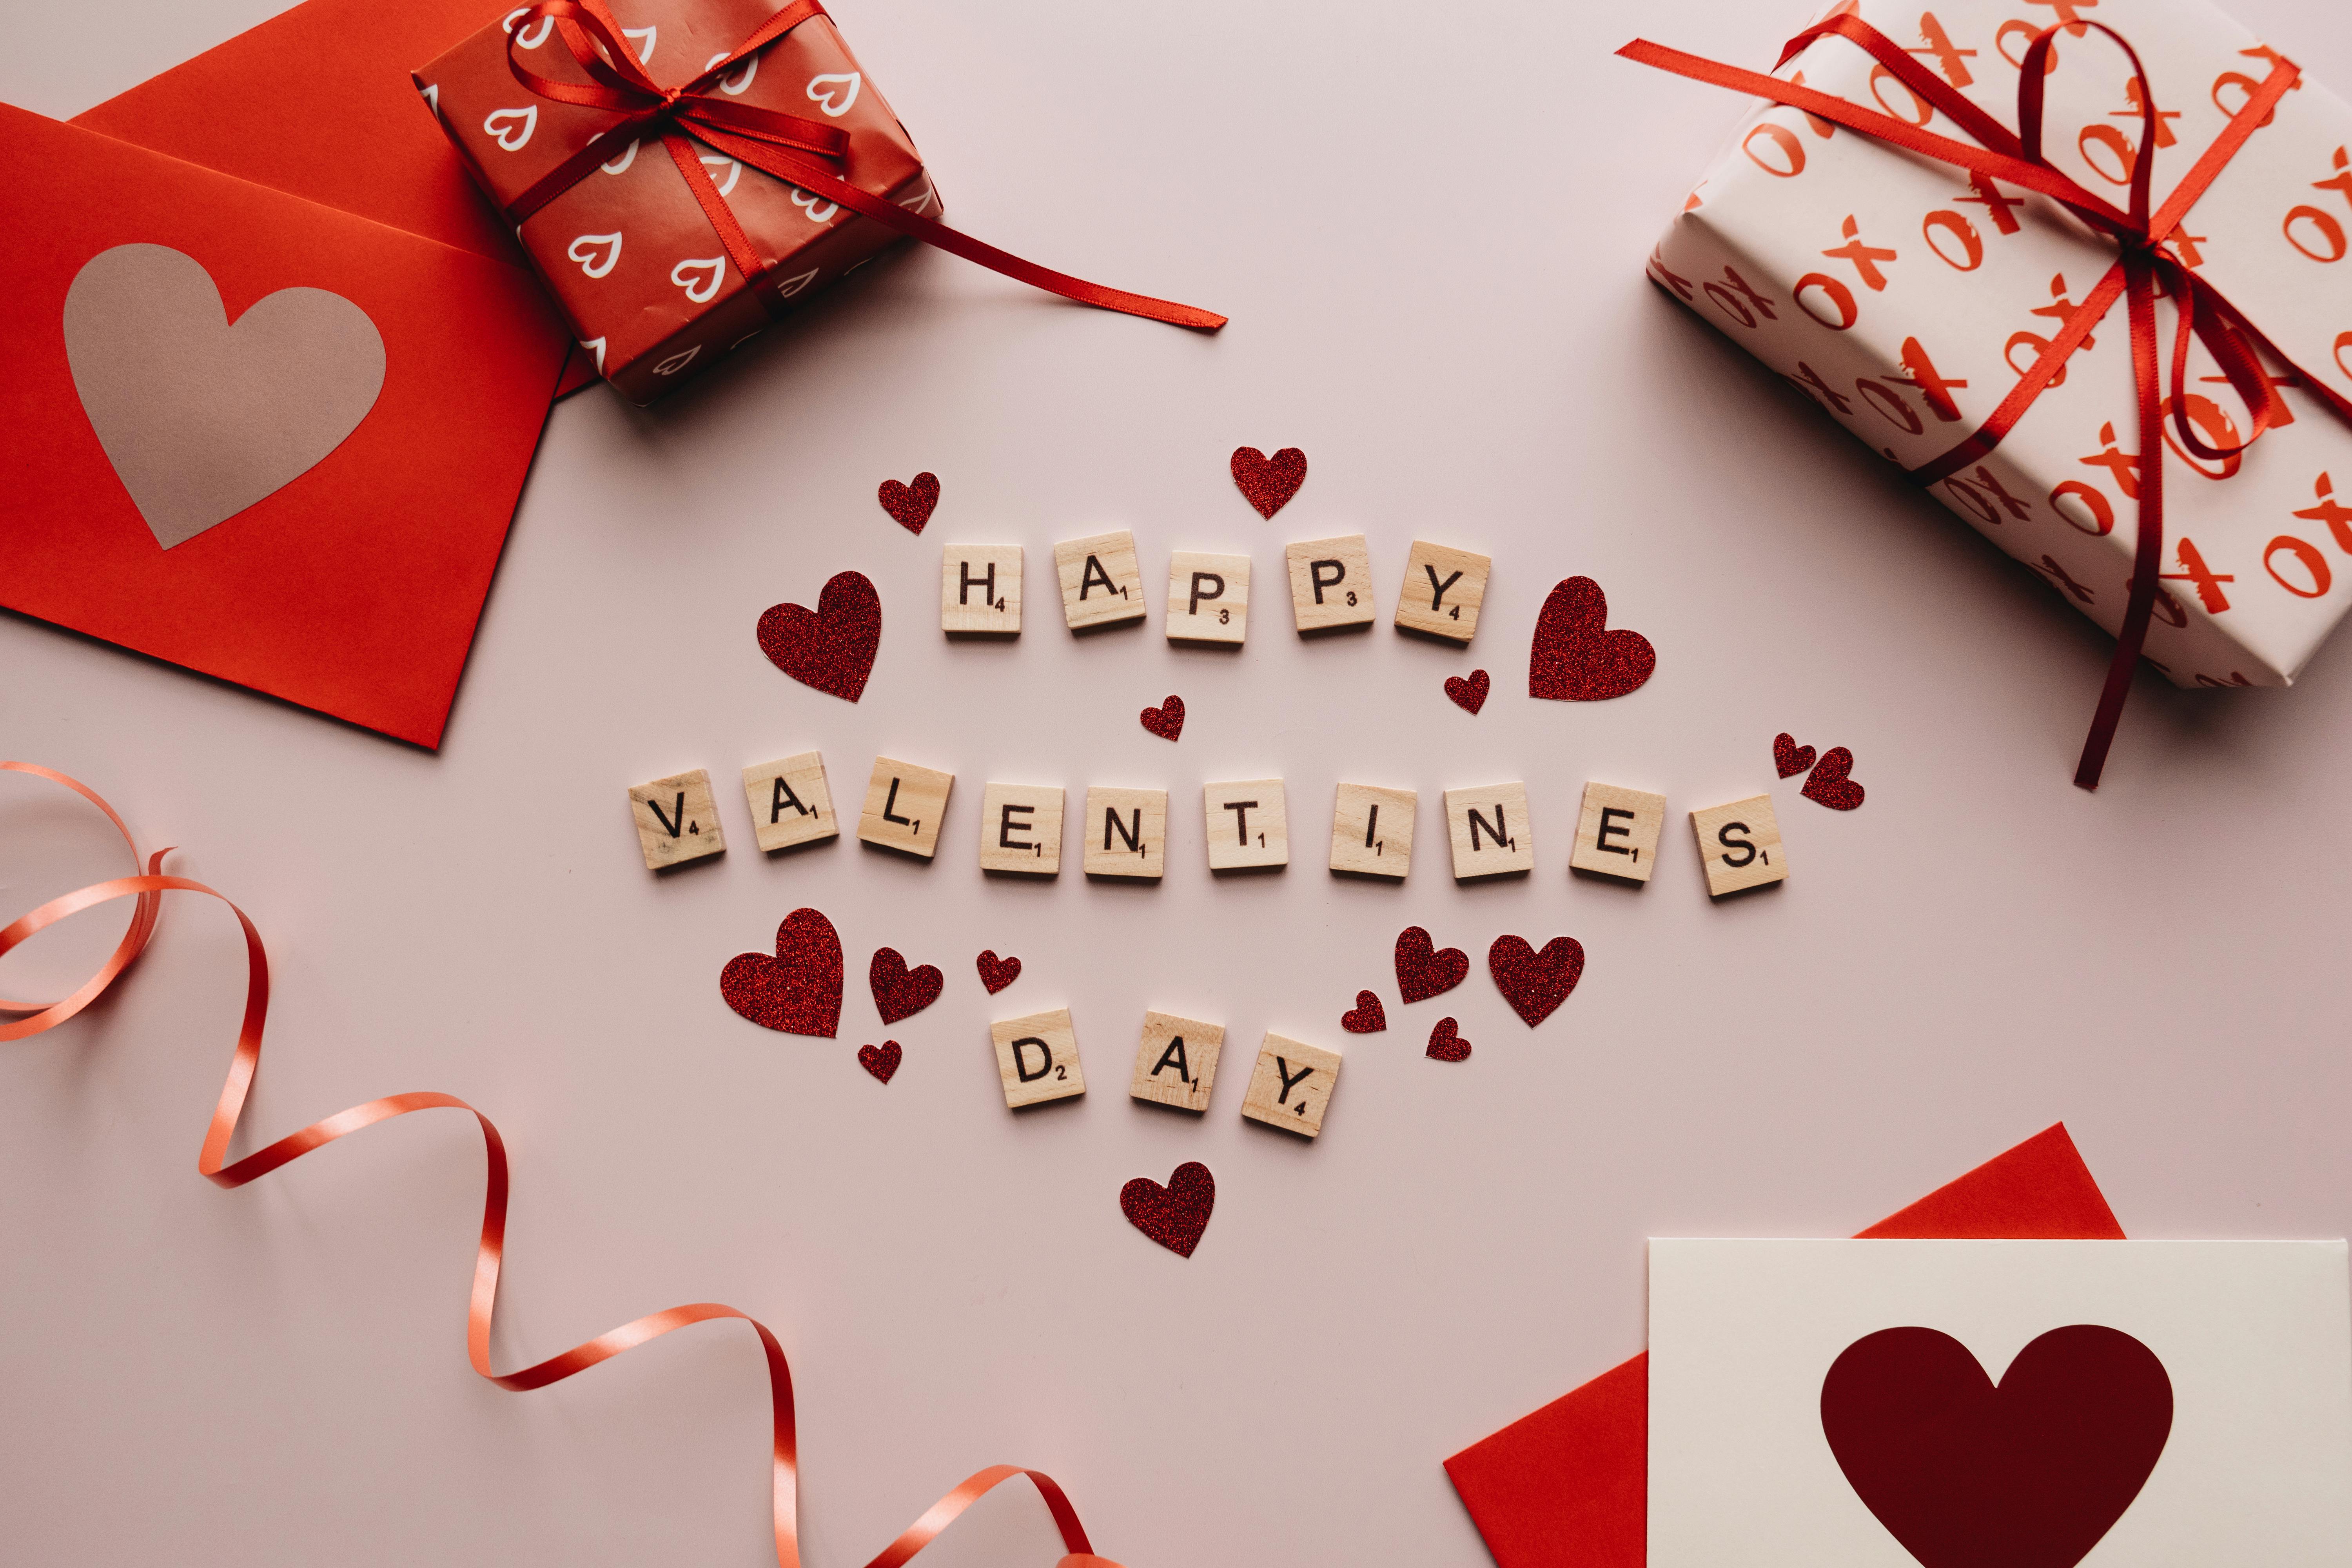 NawPic  Preppy Valentines Day Download httpswwwnawpiccompreppy valentinesday15 Download Preppy Valentines Day Wallpaper for free use  for mobile and desktop Discover more aesthetic valentines flower heart  iphone love Wallpaper  Facebook